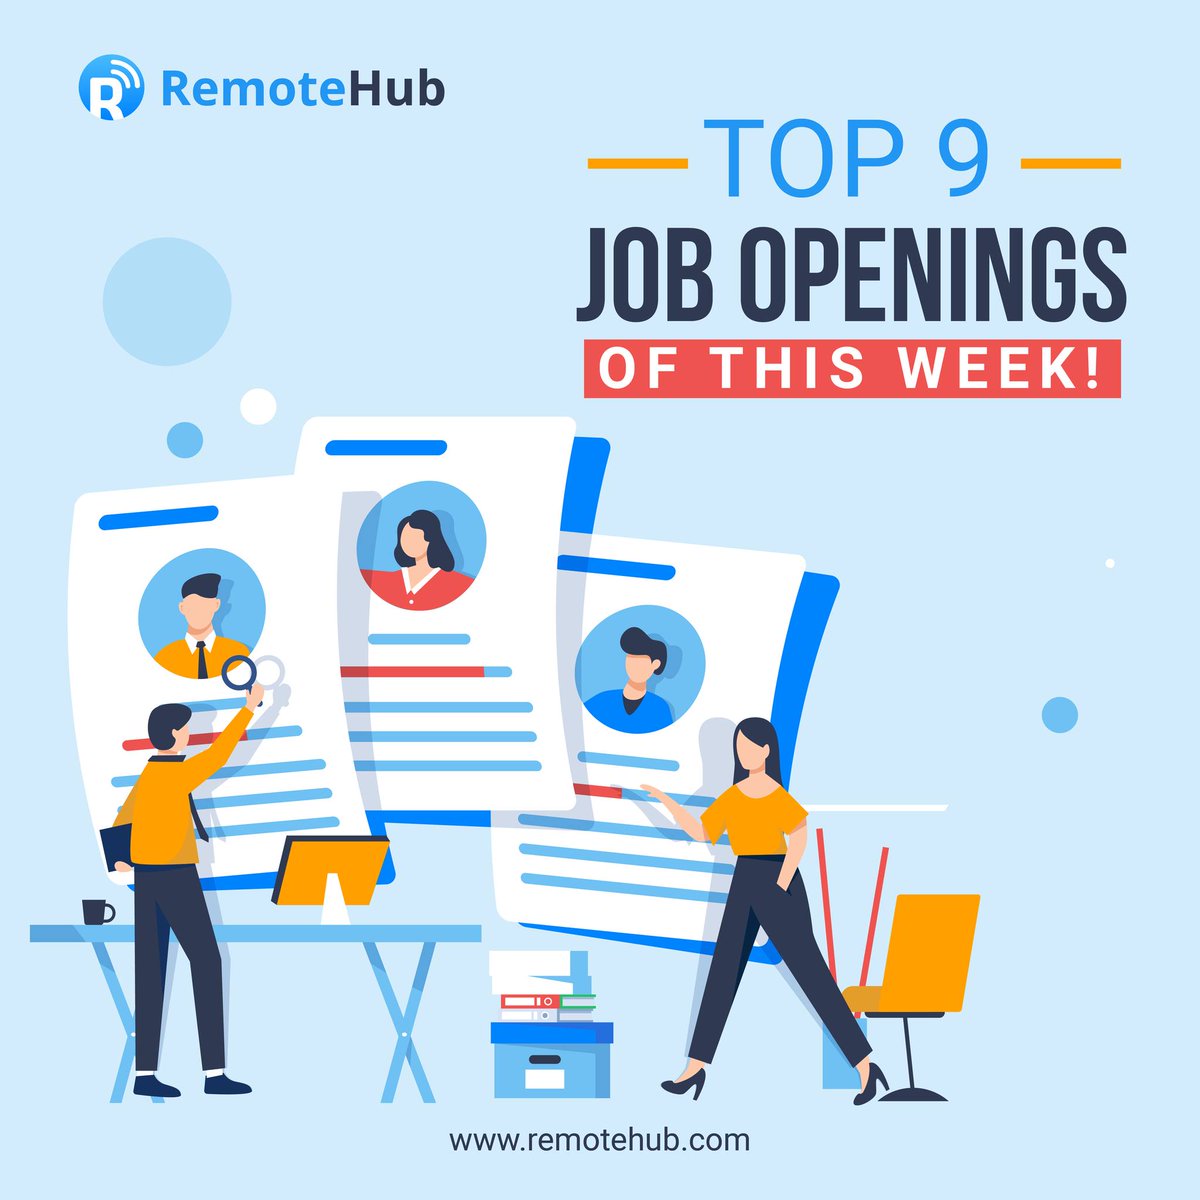 Check out our top 9 job listings curated to match your preferences, whether you seek remote or in-office positions. Start your path to a rewarding career today!
Apply here - remotehub.com/jobs

#JobOpenings #JobOpportunities #Hiring #Recruitment #FreelanceJobs